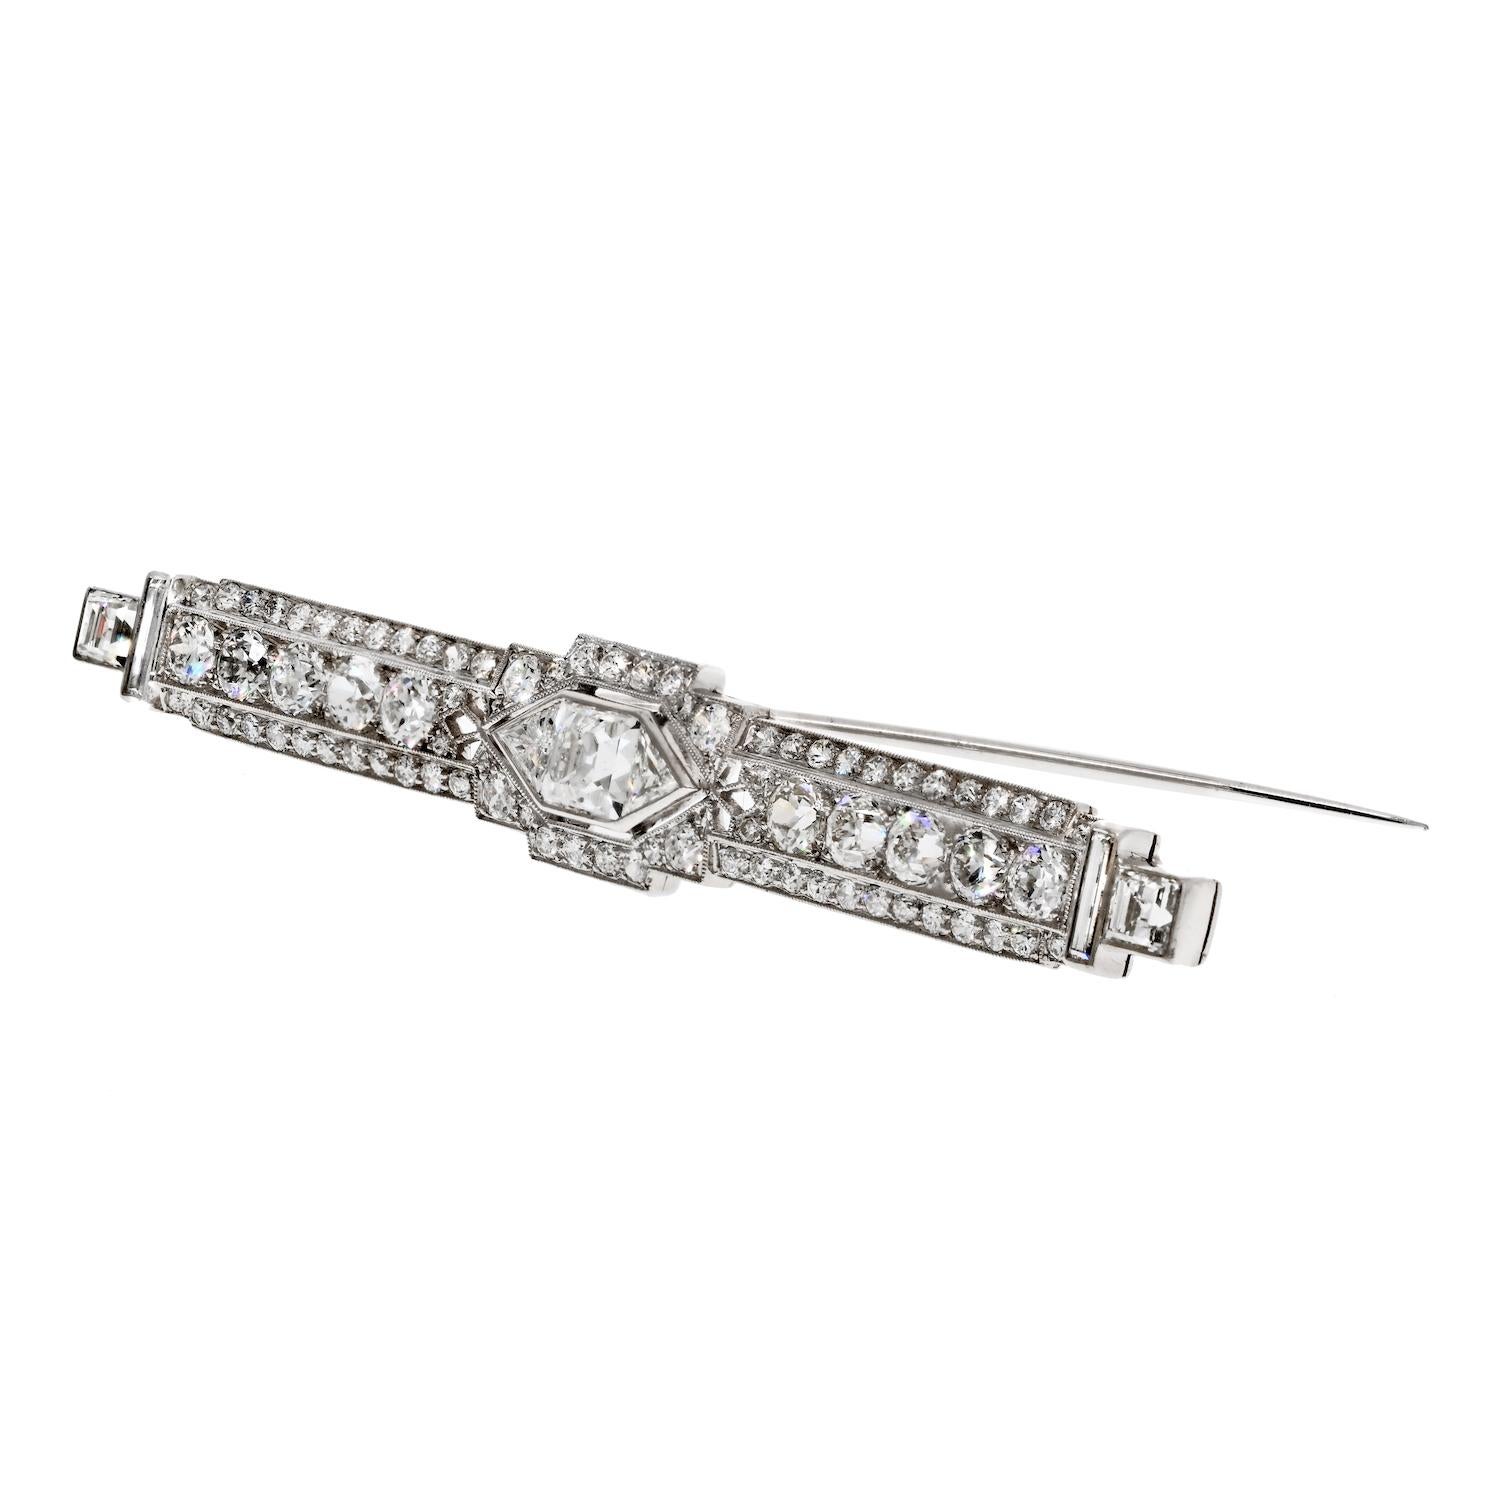 The Art Deco platinum brooch is a stunning piece of jewelry that showcases the exquisite artistry and design of the Art Deco era. This brooch is made with old cut diamonds, with an asscher cut diamond in the center and on the ends, creating a